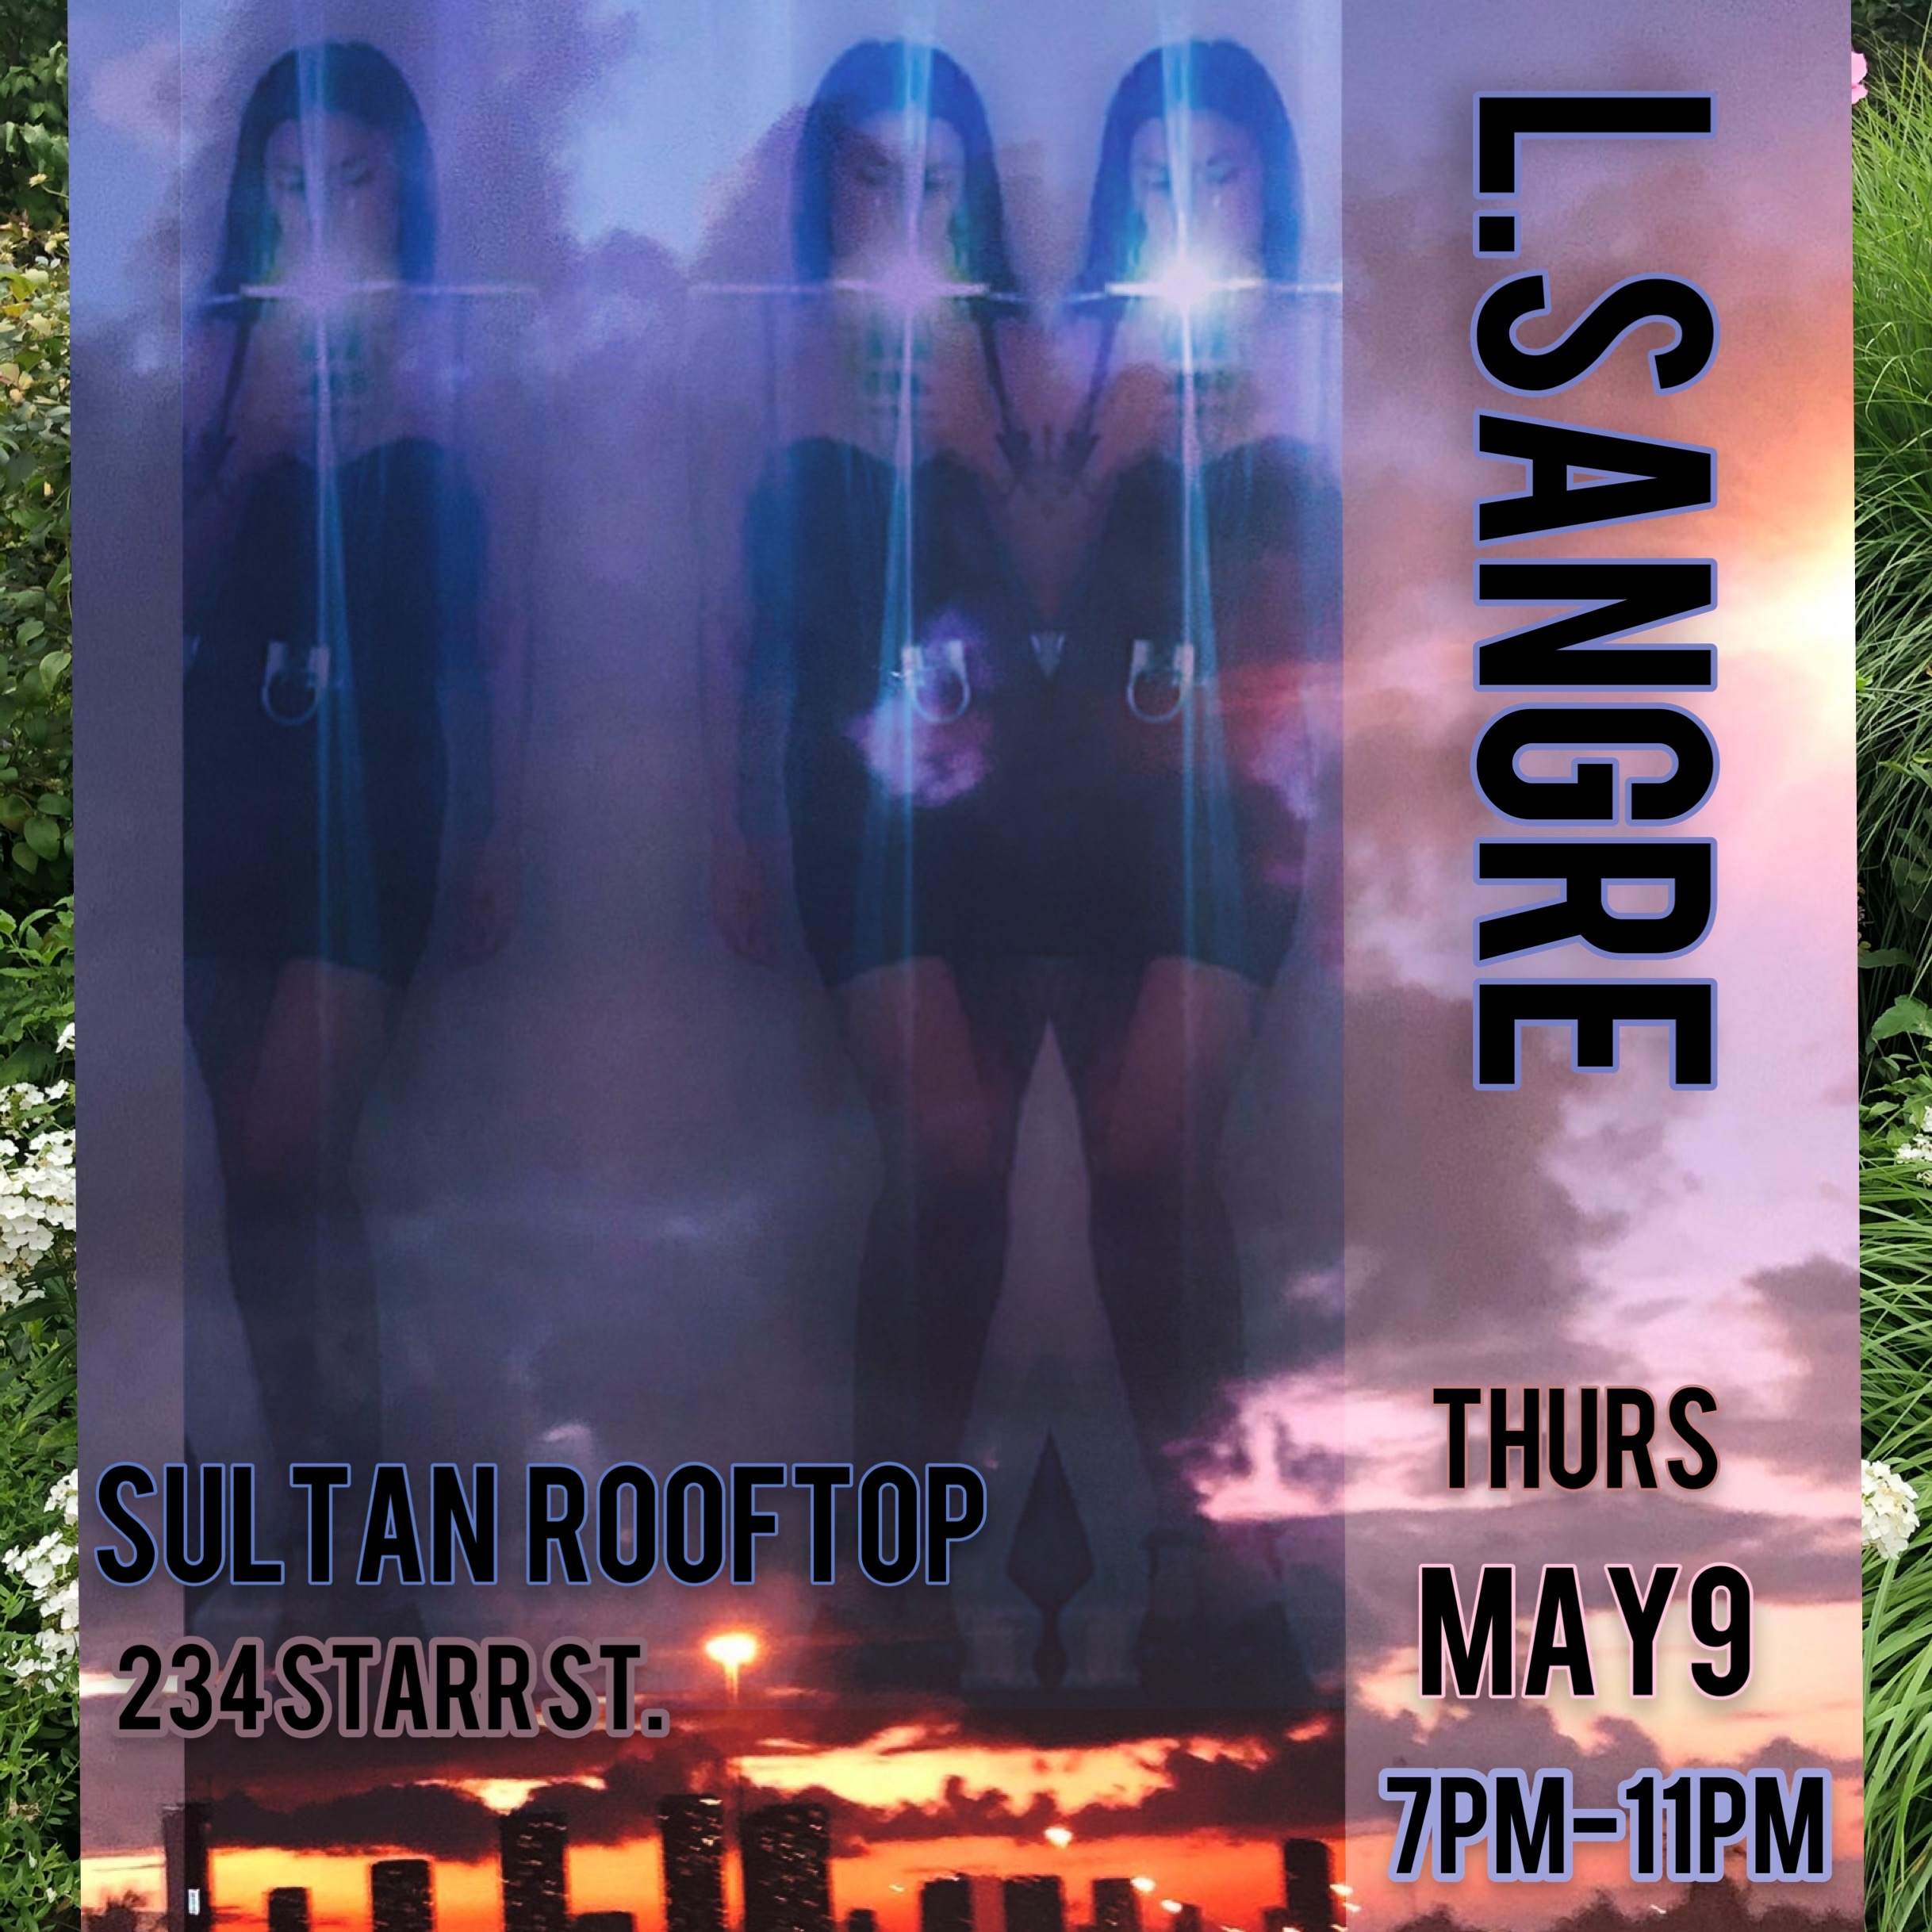 SANGRE SUNSET at SULTAN ROOFTOP - フライヤー表